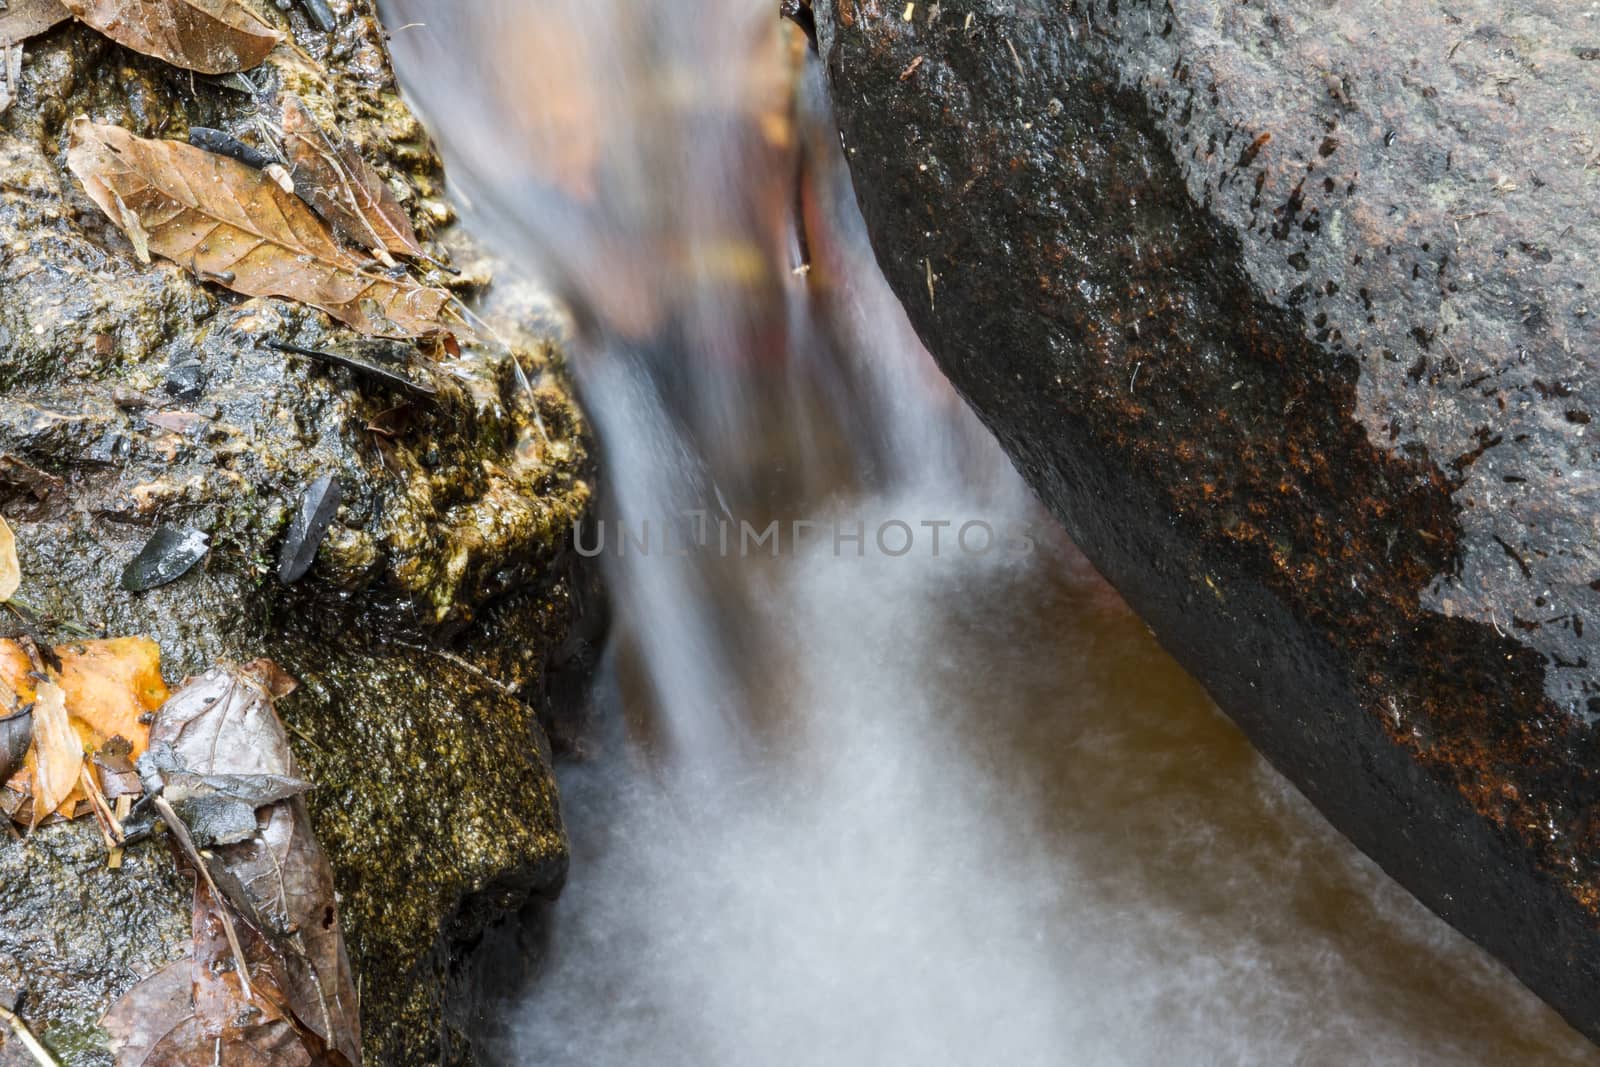 Stream running between stones with leaves on